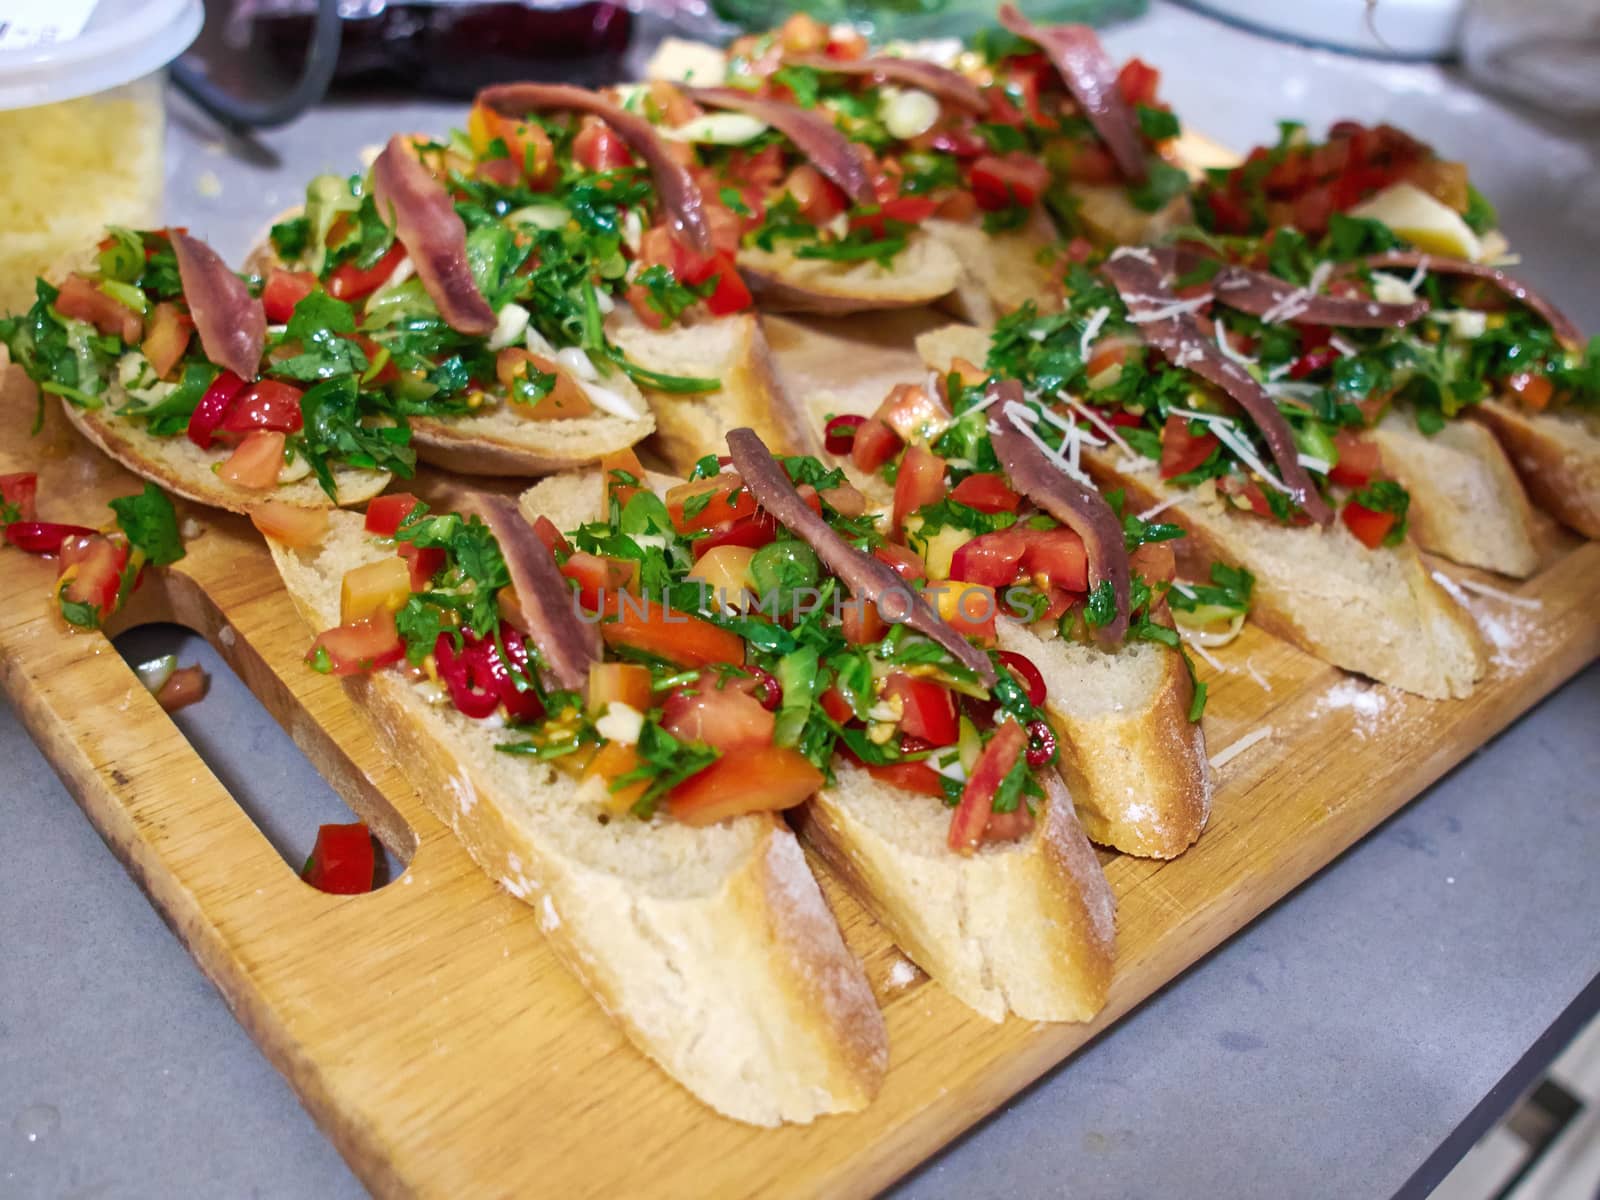 Typical Italian Bruschetta with tomatoes, herbs and oil on toast by Ronyzmbow